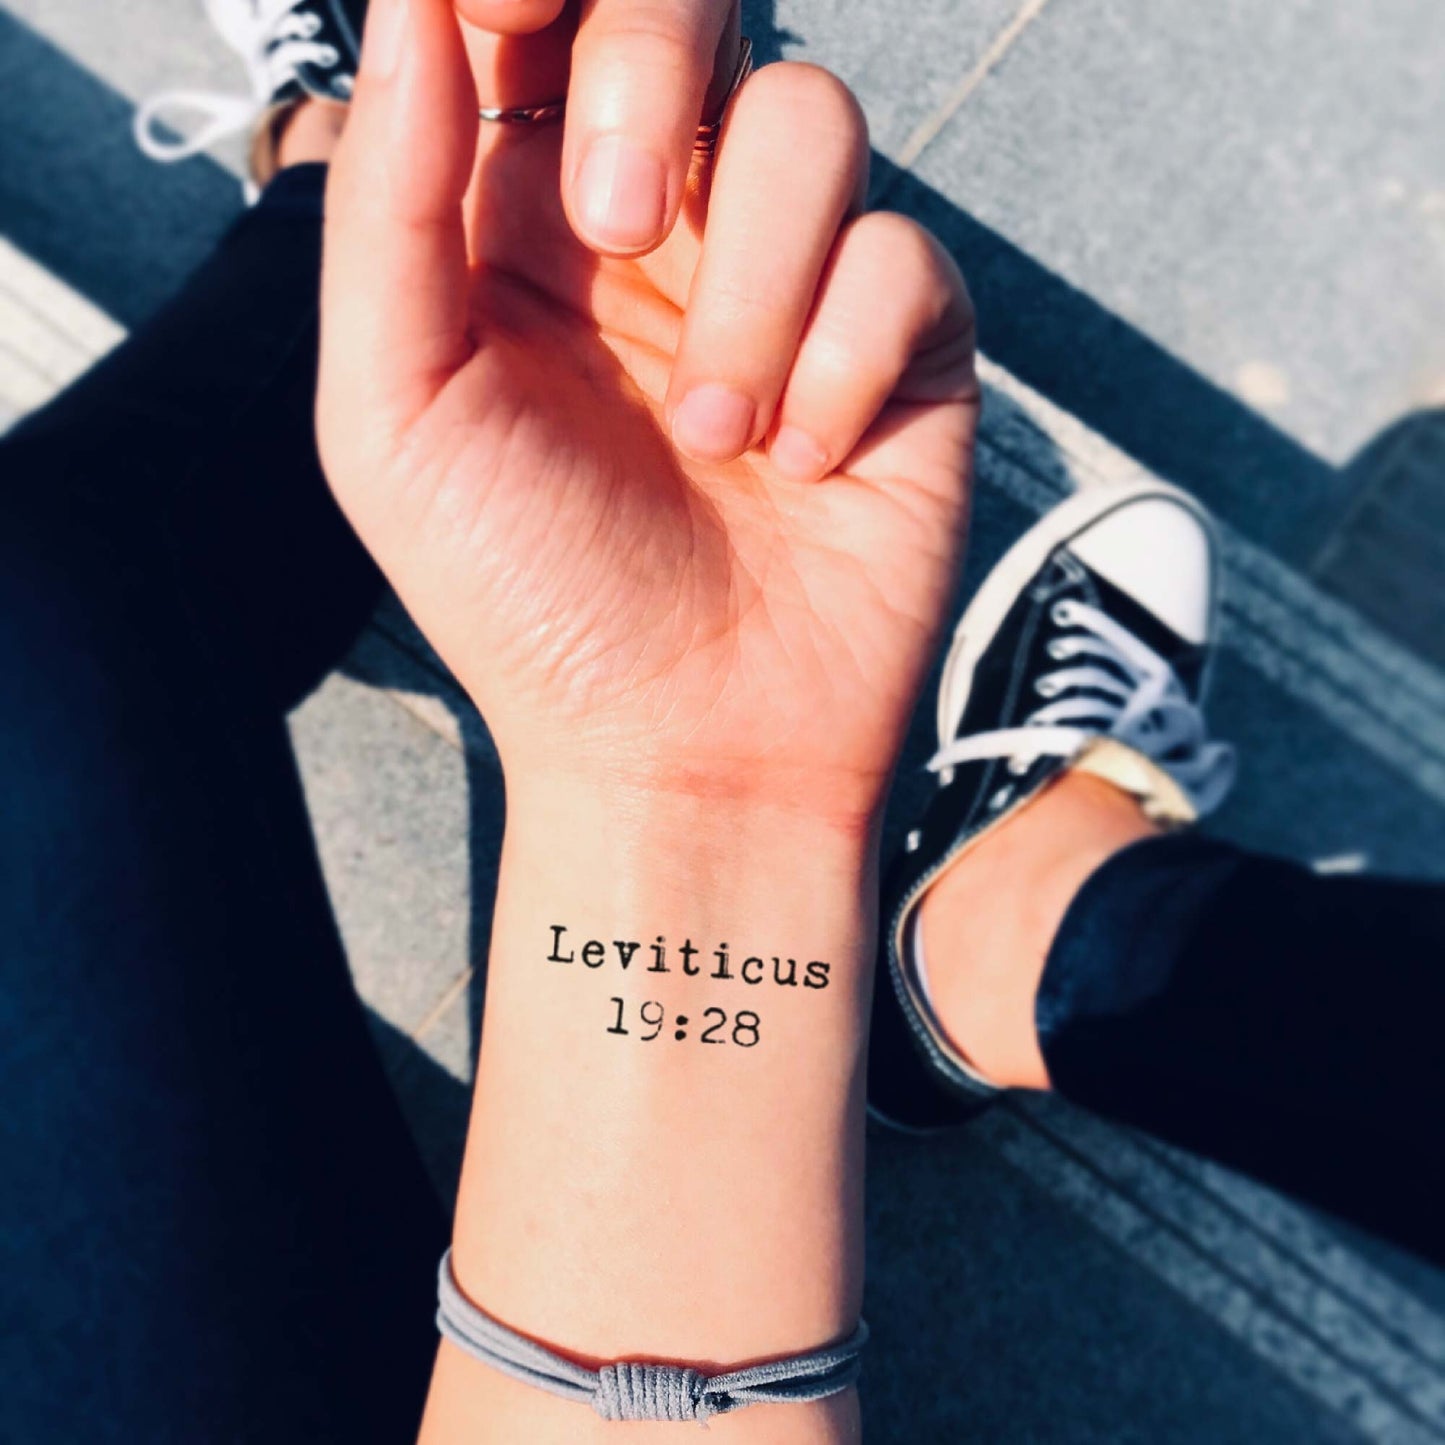 fake small Leviticus 19:28 bible verse quote say scripture ironic god judge flesh lettering temporary tattoo sticker design idea on hand wrist